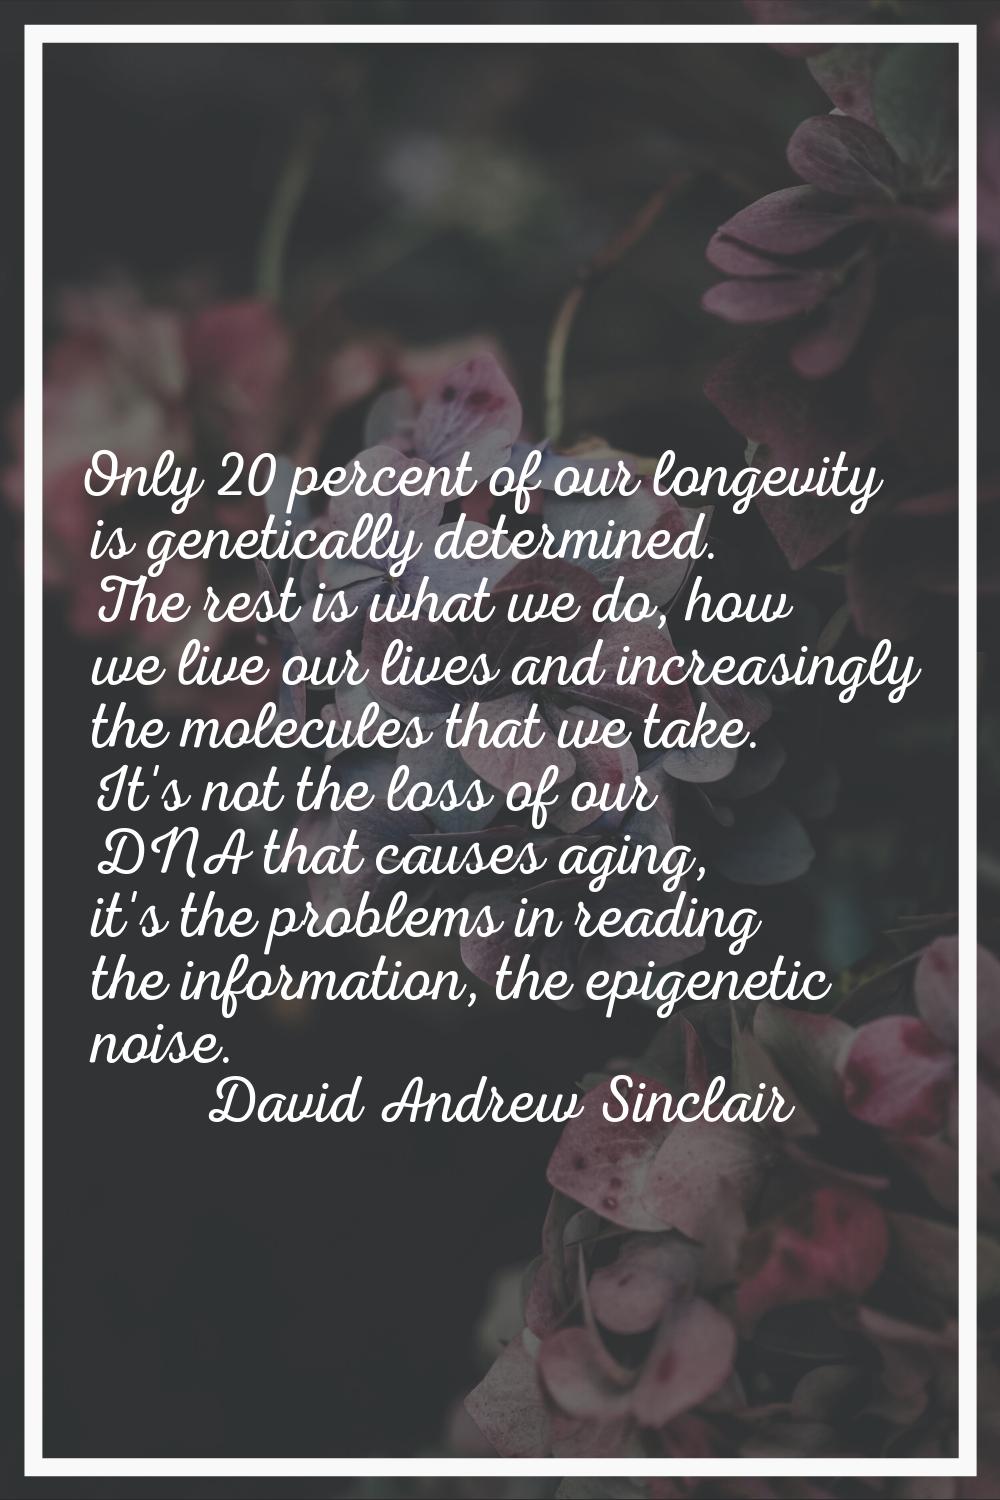 Only 20 percent of our longevity is genetically determined. The rest is what we do, how we live our